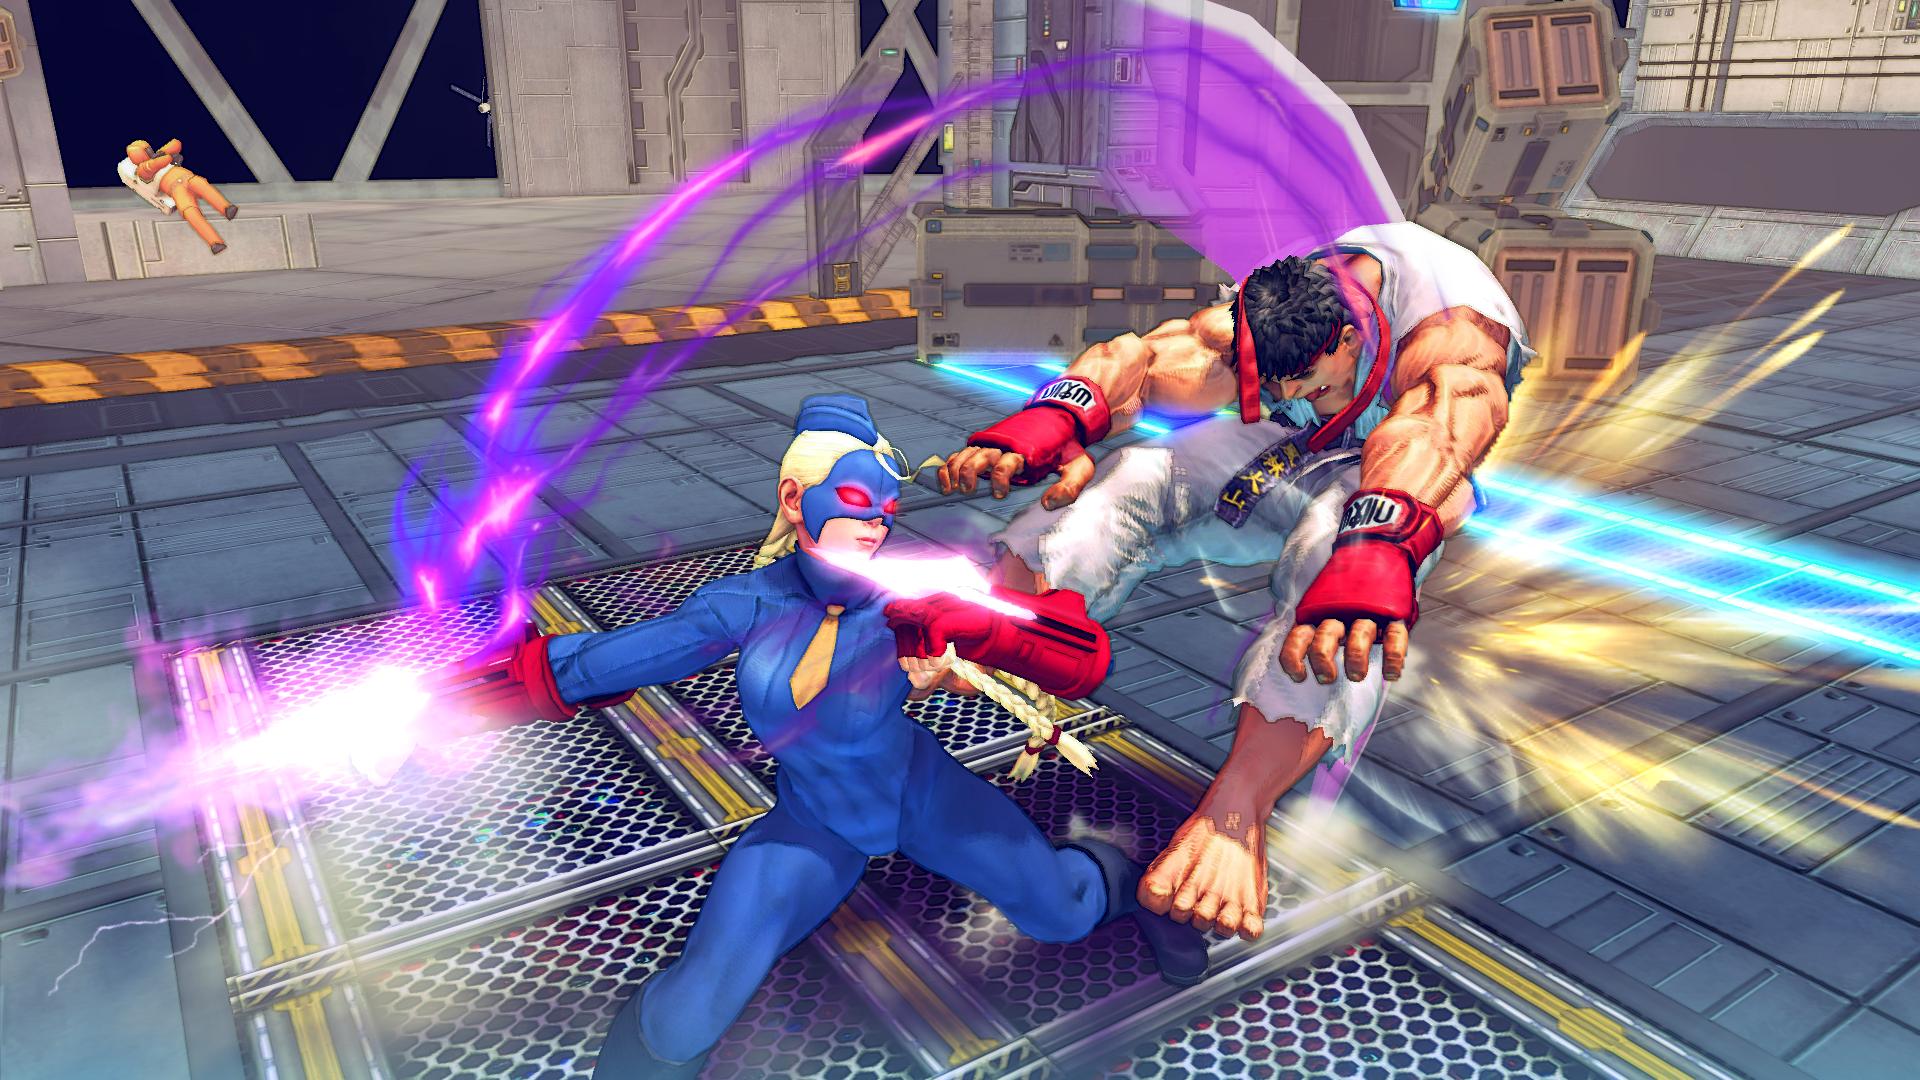 Ultra Street Fighter IV’s Fifth New Character is Decapre